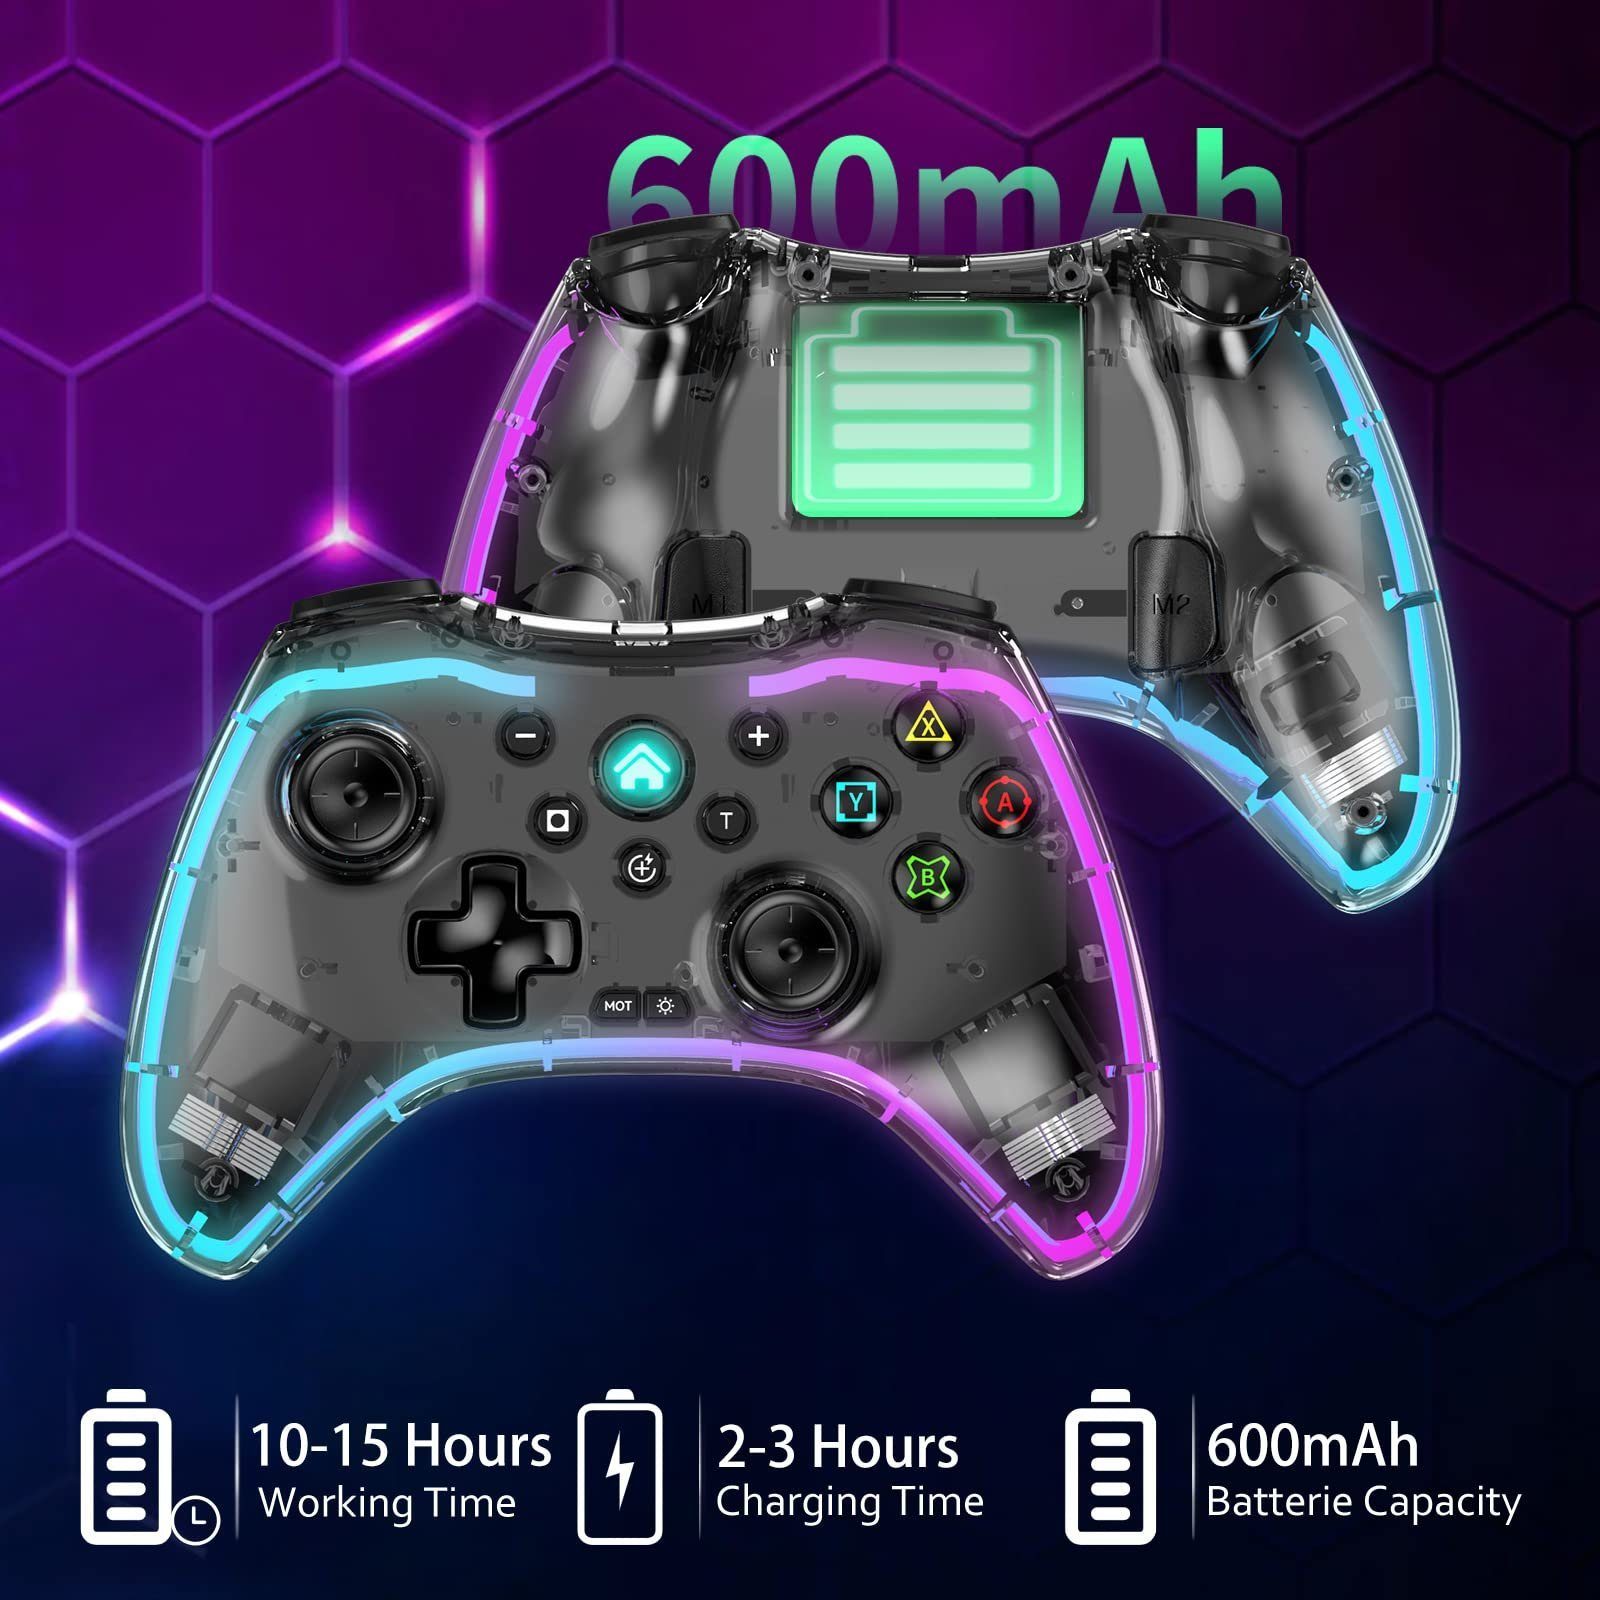 Haiaveng Gamepad für Nintendo Switch/Switch LED/7-COLOR) (RGB Lite/OLED, Atmungs Nintendo-Controller Wireless Controller